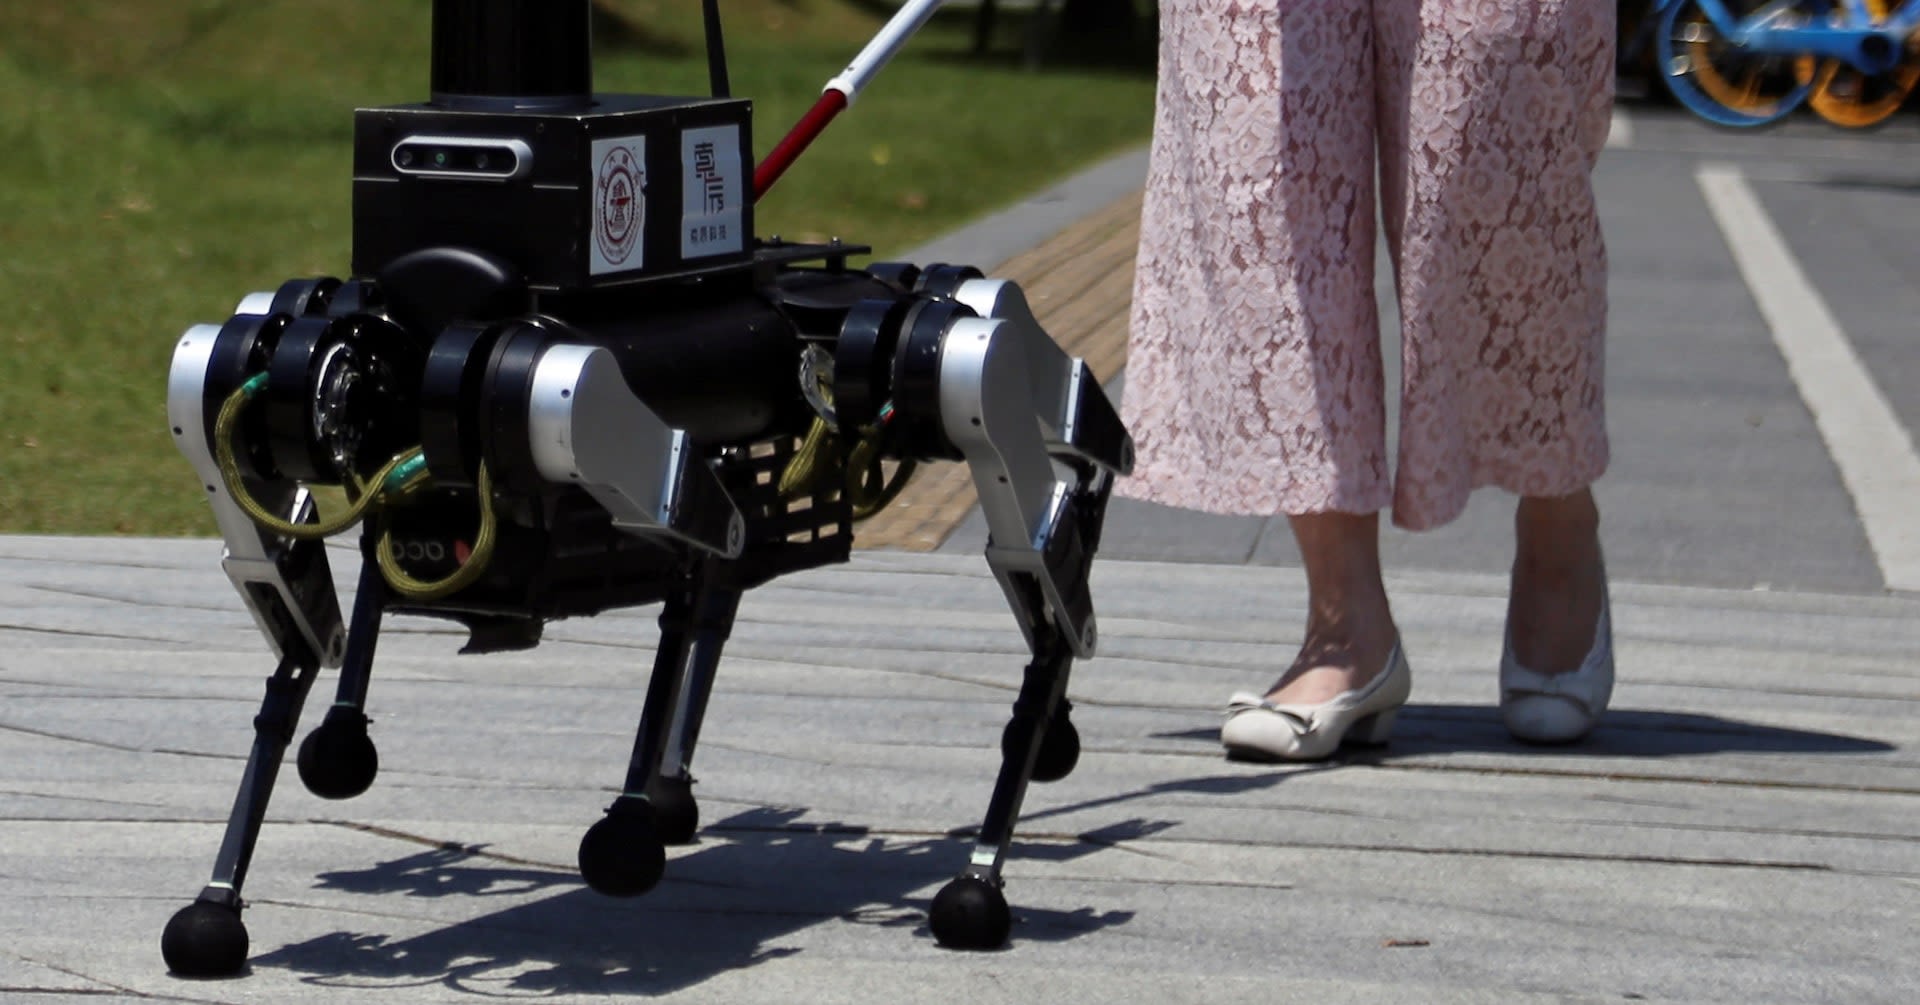 Chinese robot 'guide dog' aims to improve independence for visually impaired